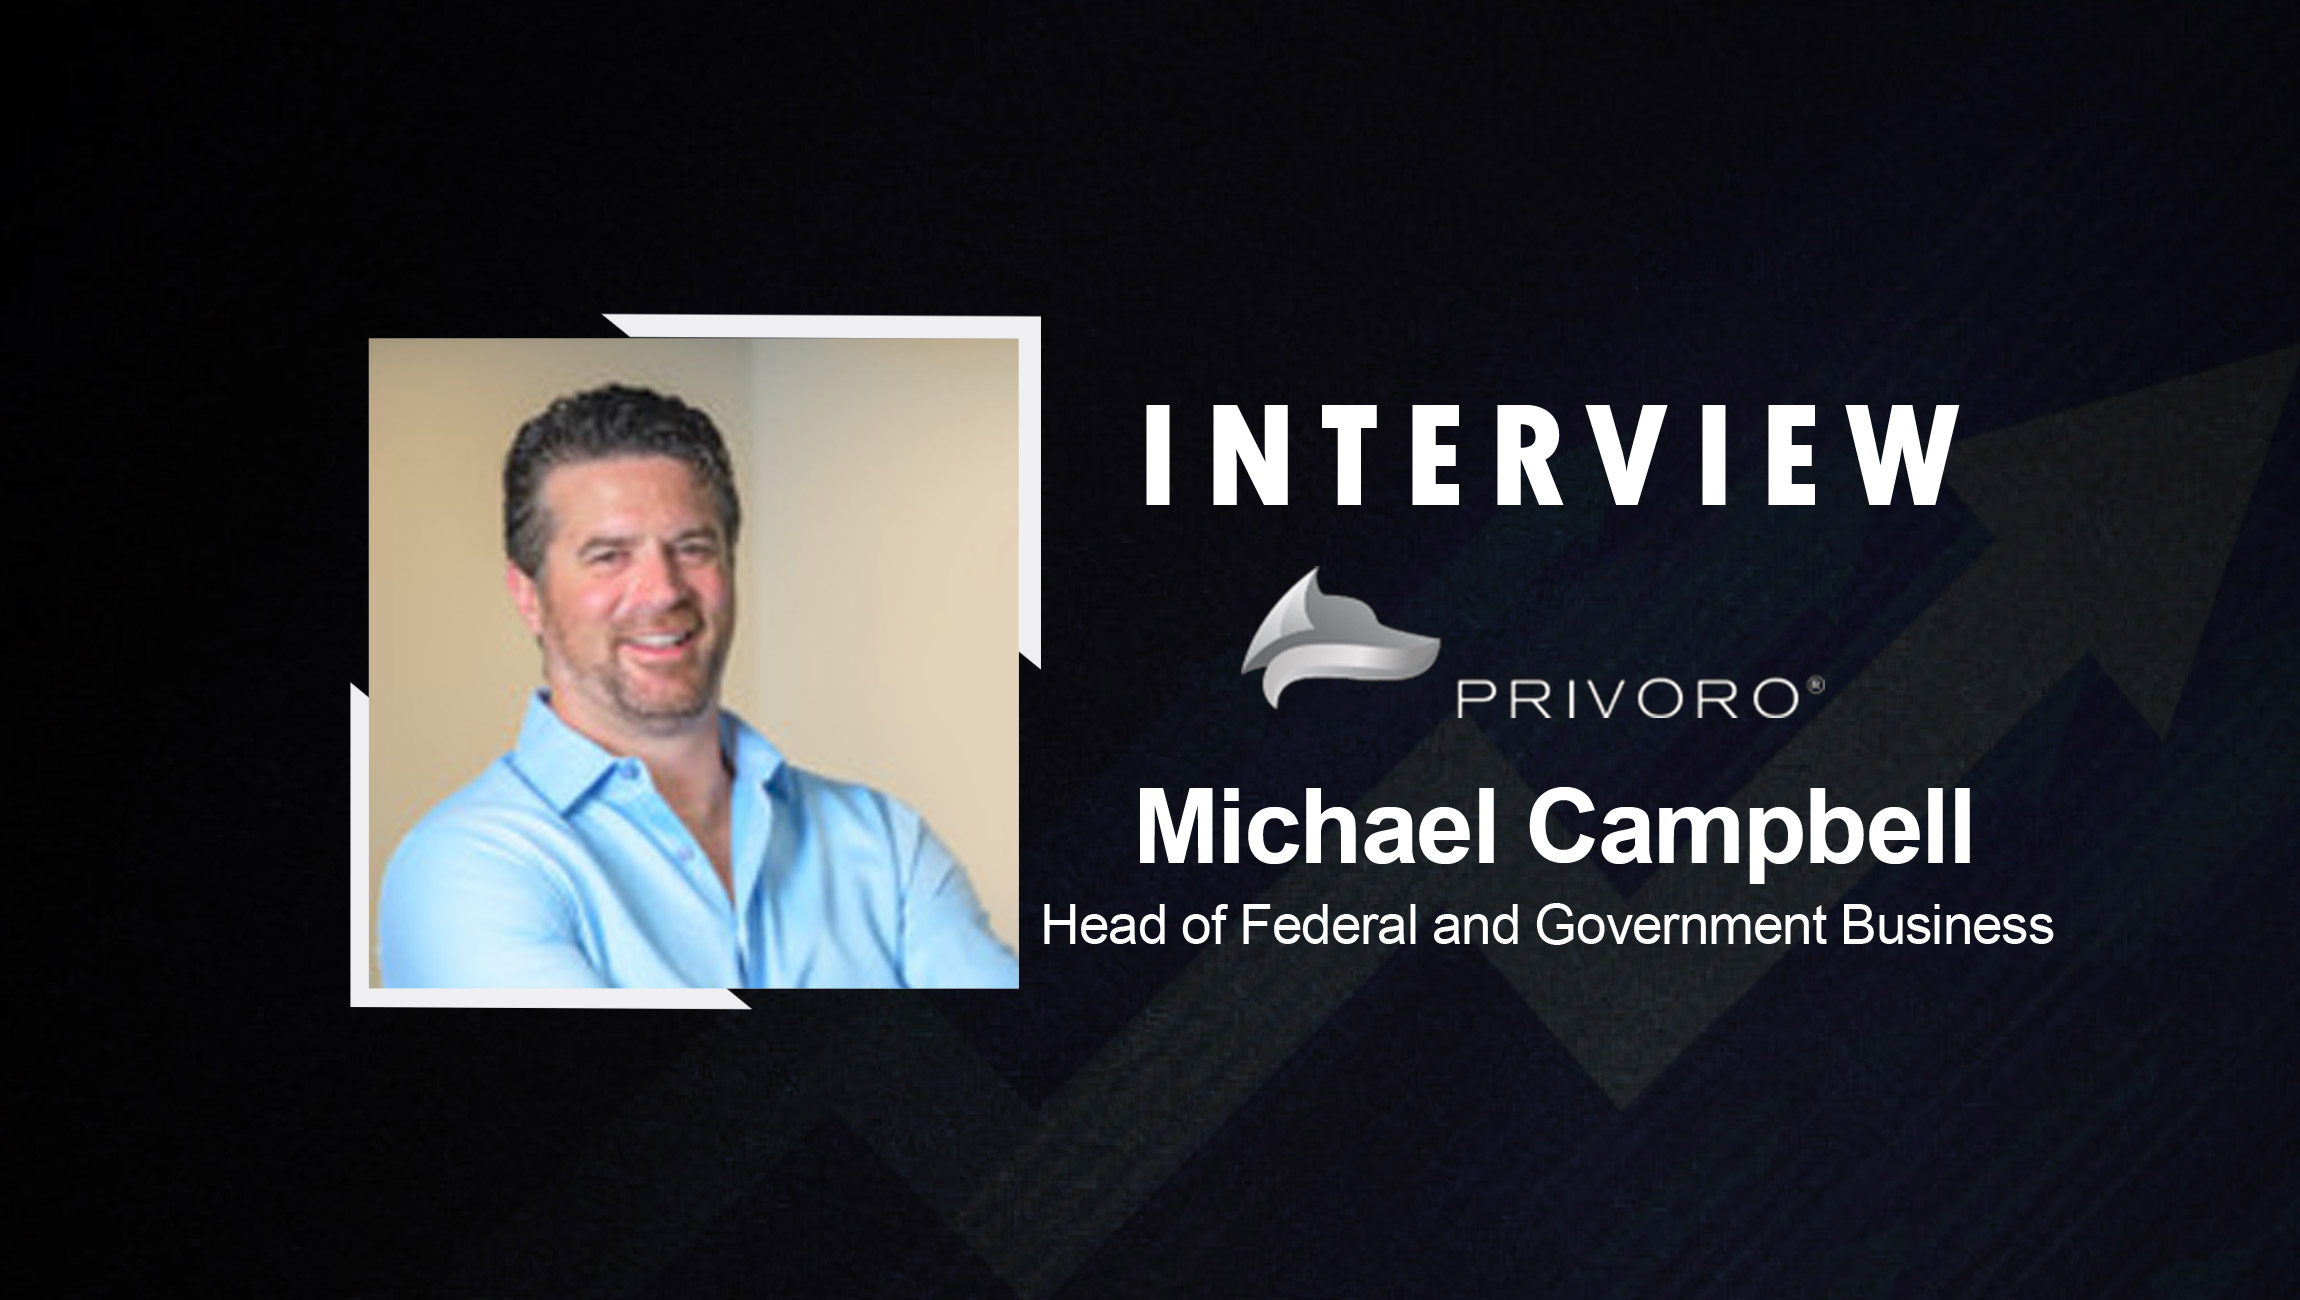 SalesTechStar Interview with Michael Campbell, Head of Federal and Government Business at Privoro